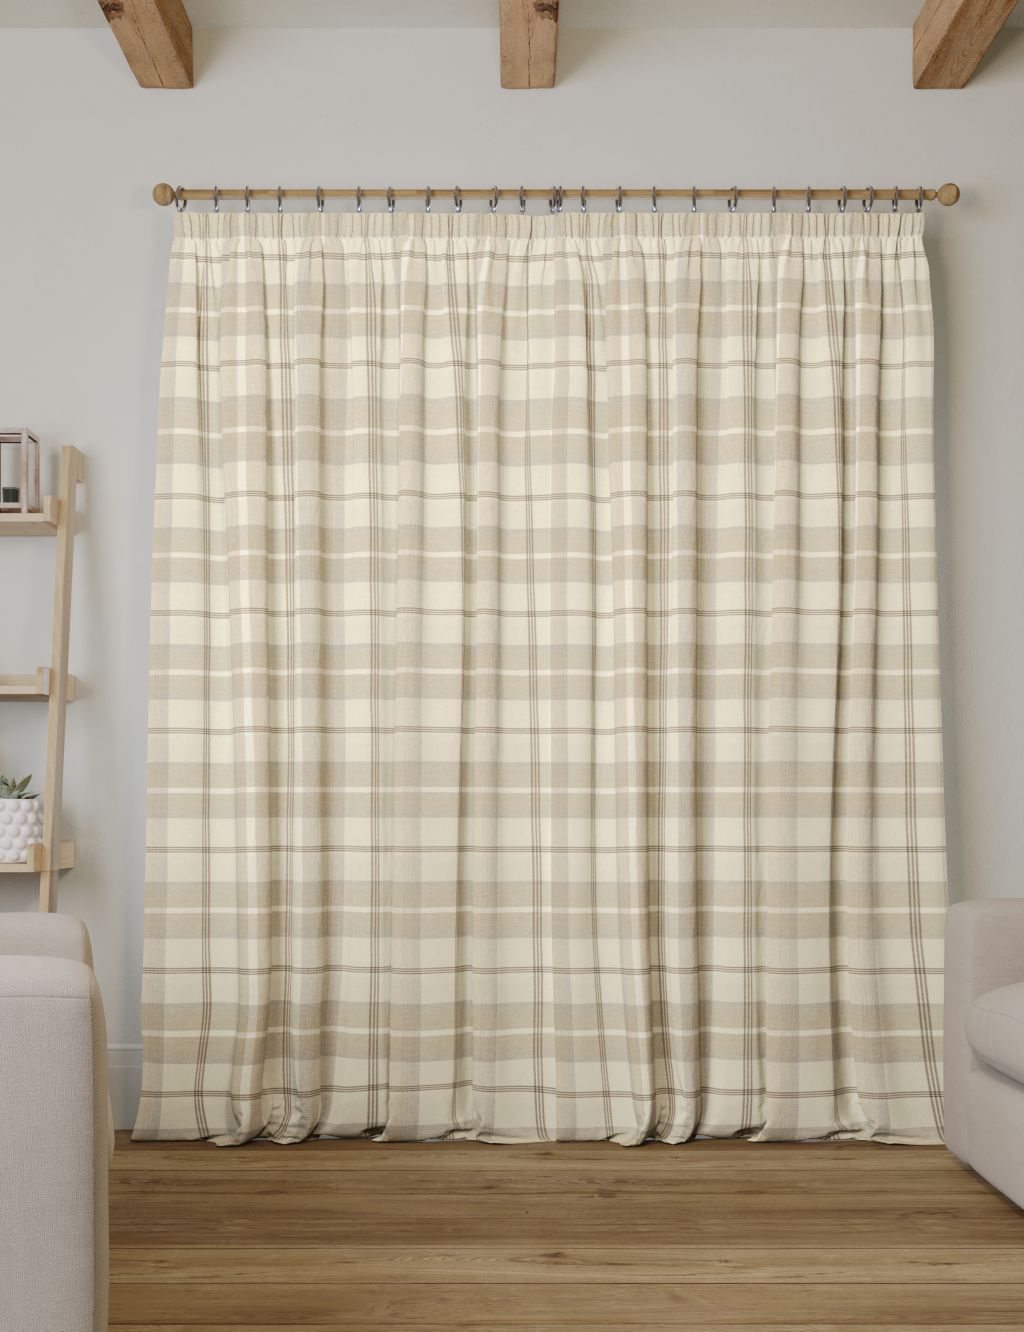 Brushed Woven Checked Pencil Pleat Curtains image 4